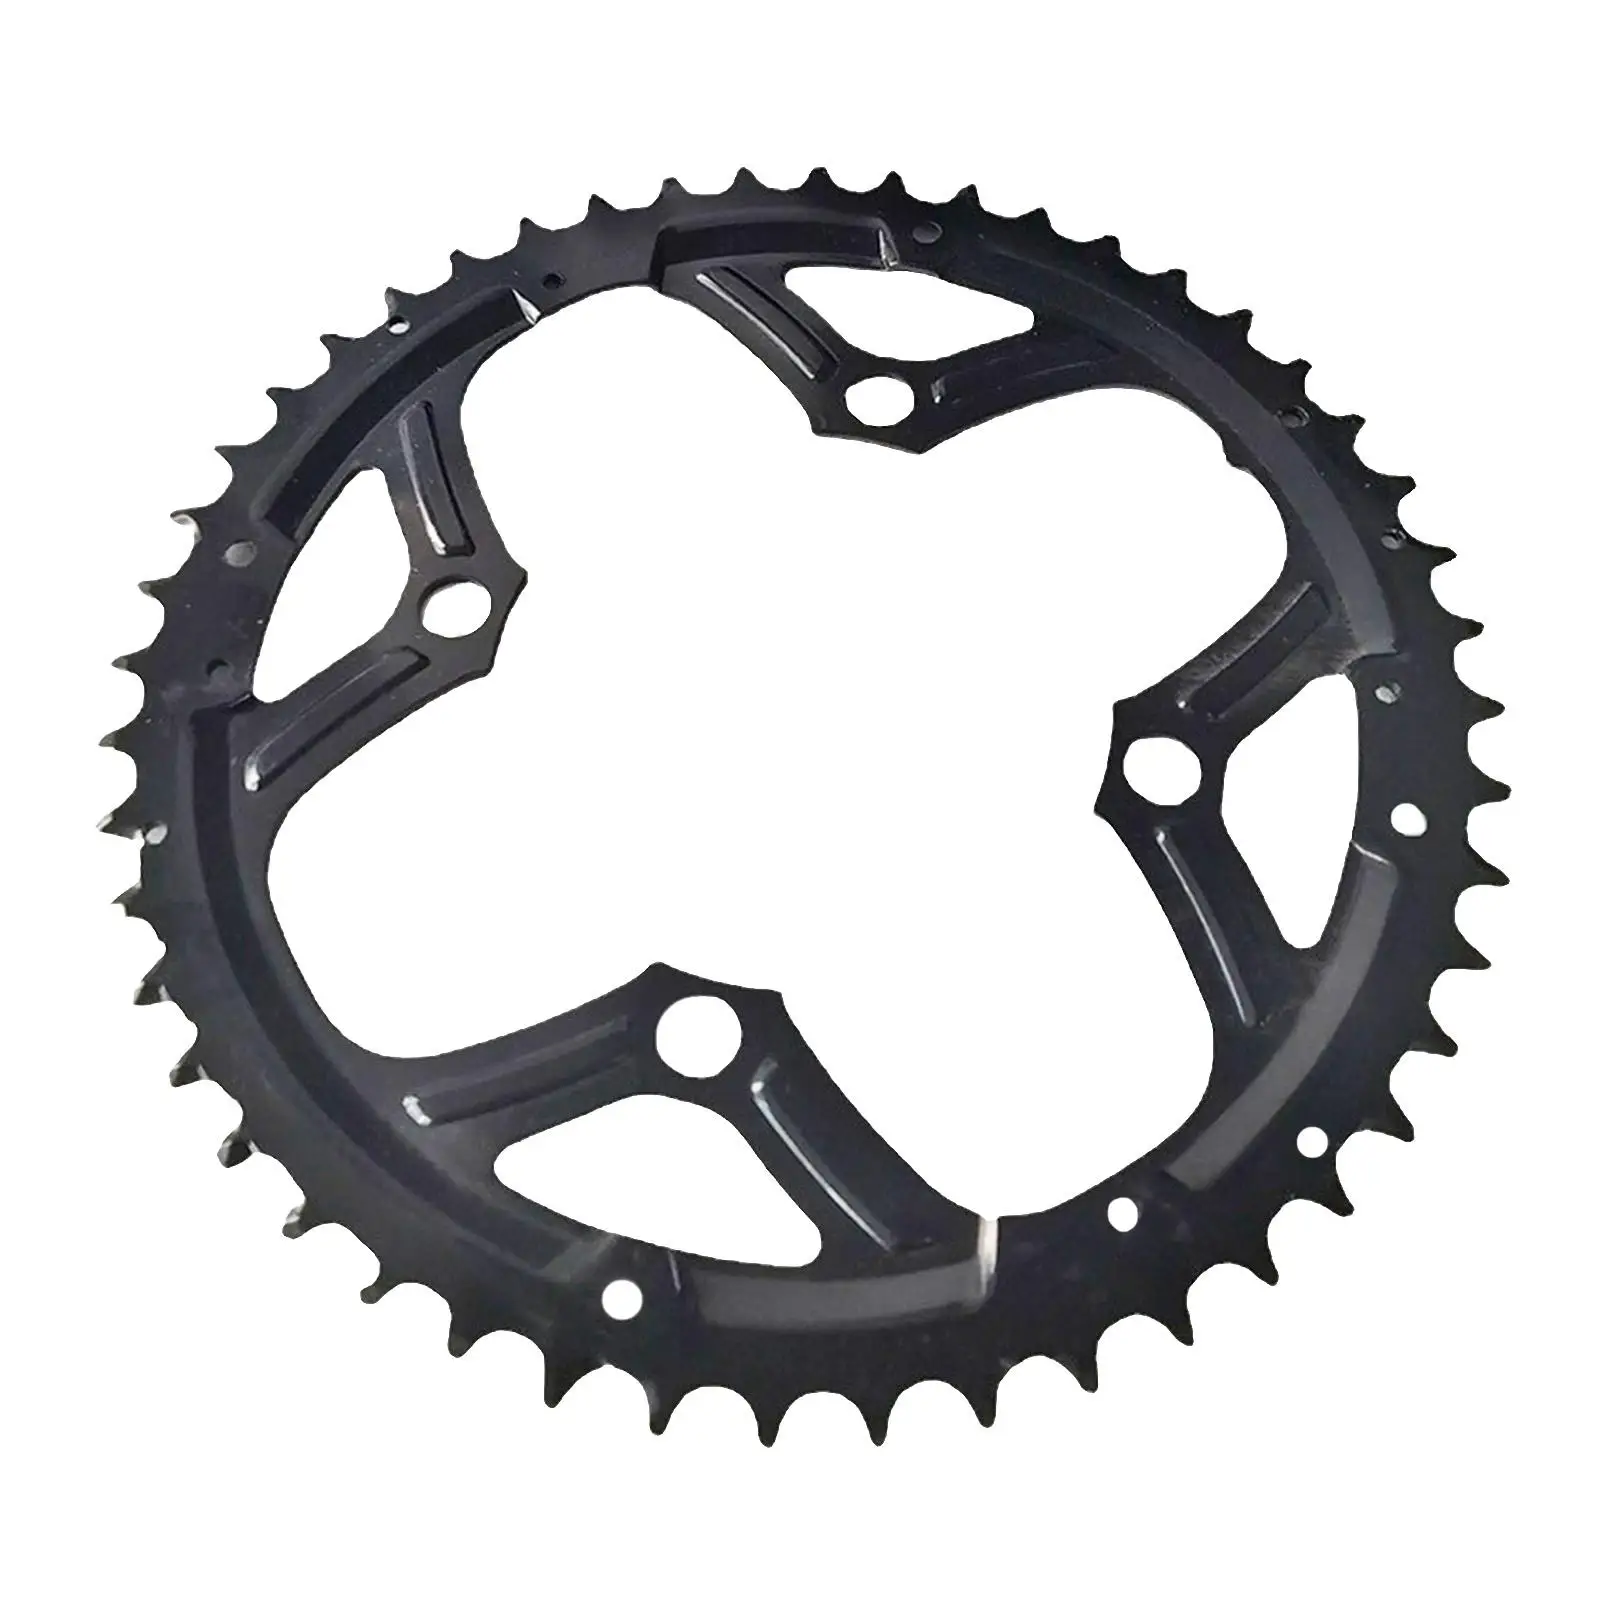 Round Oval Chainring 104mm BCD 48T Narrow Wide Single Chainring for 7/8/9   XC -Bike  Mountain Bike 